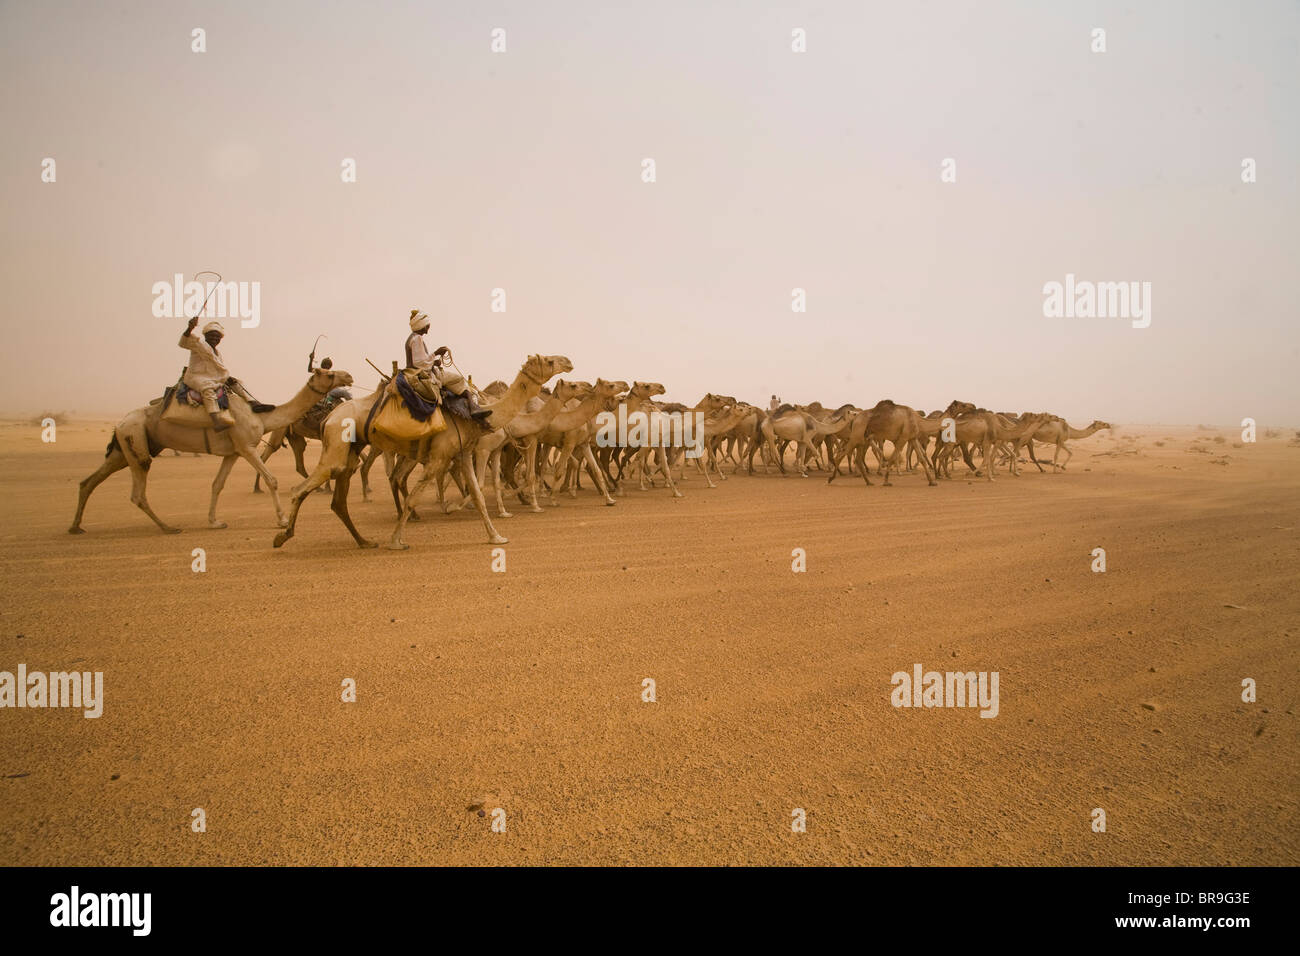 A camel caravan travels through the Sahara Desert Sudan.150 000 camels travel from Sudanto Egypt yearly to be sold. Stock Photo